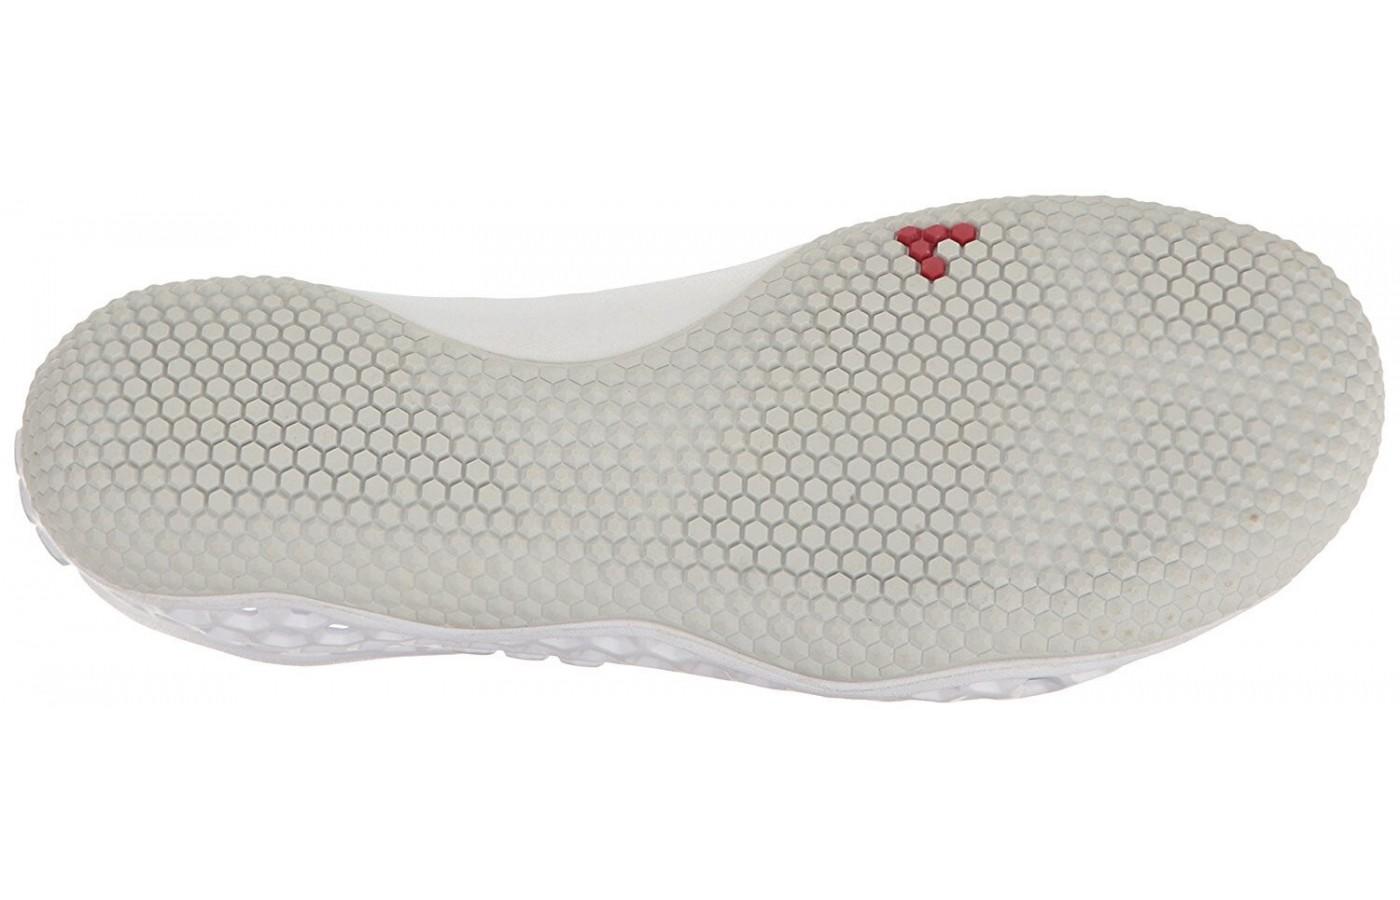 the outsole is extremely durable